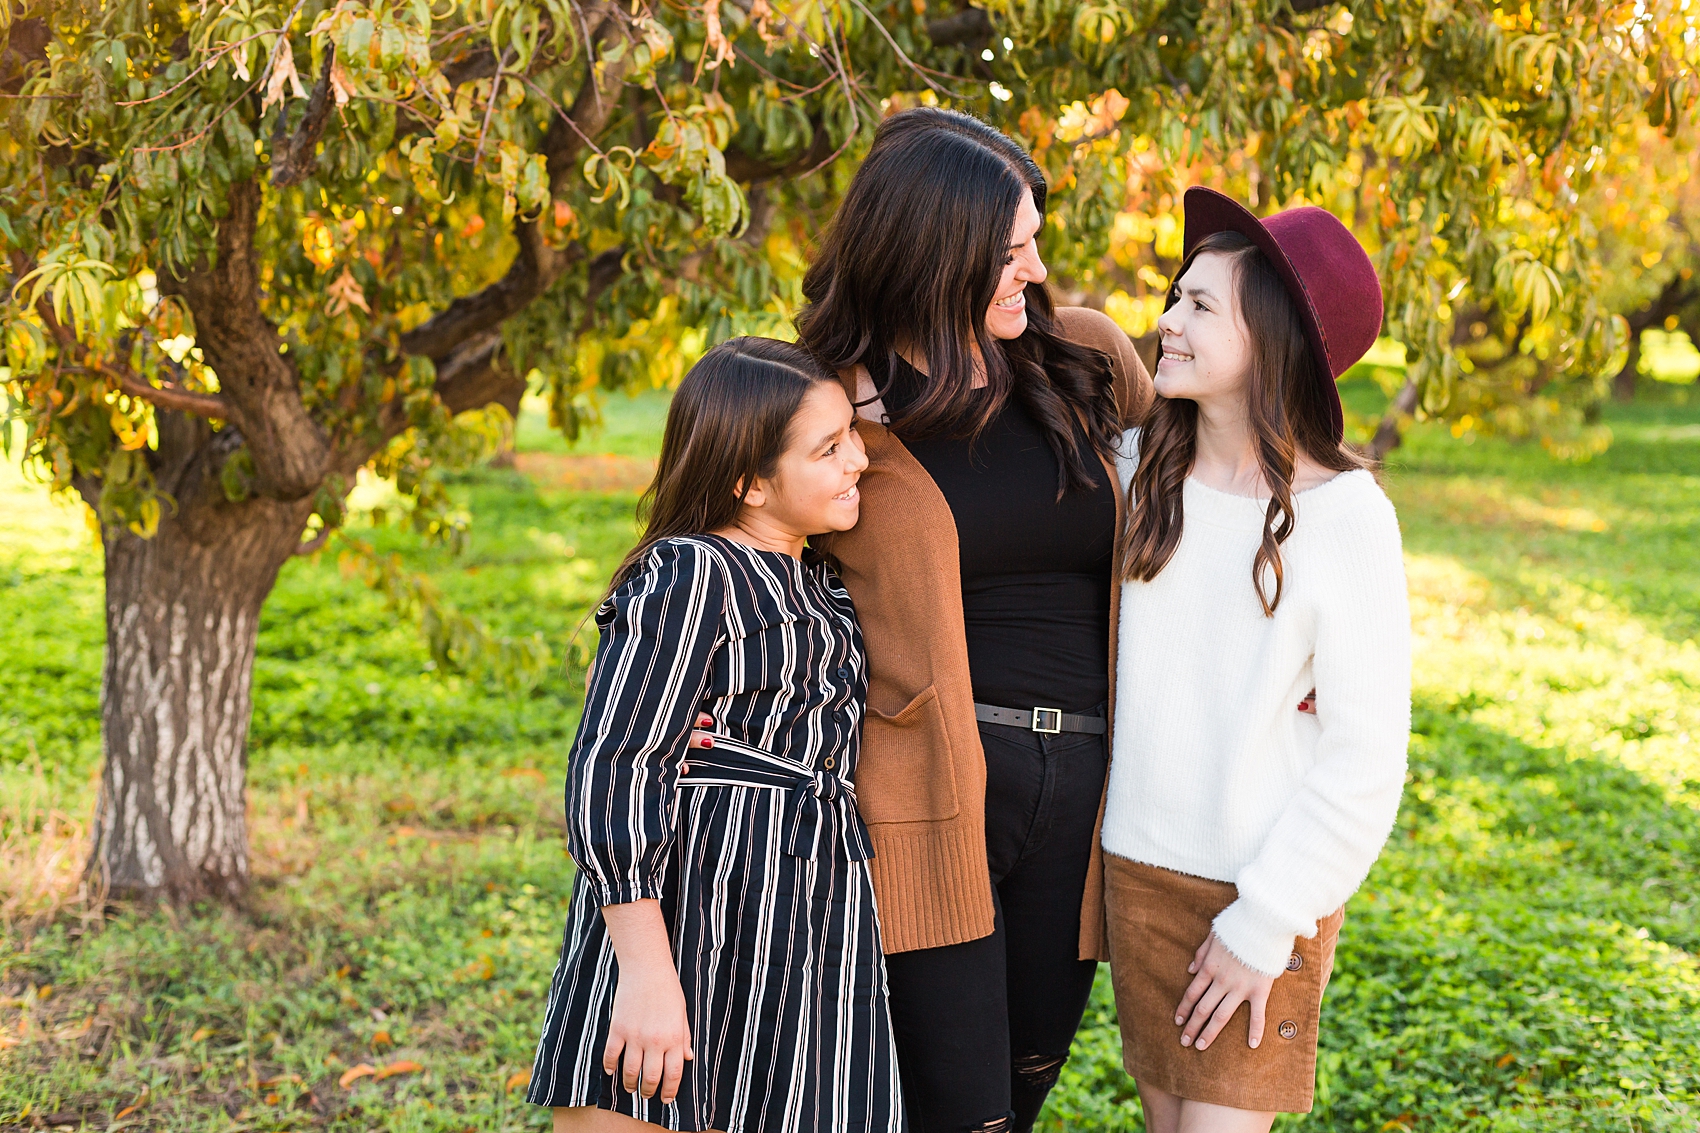 Leah Hope Photography | Phoenix Gilbert Arizona | Agritopia Green Orange Tree Orchard | Family Pictures | What to Wear | Family Photos Poses